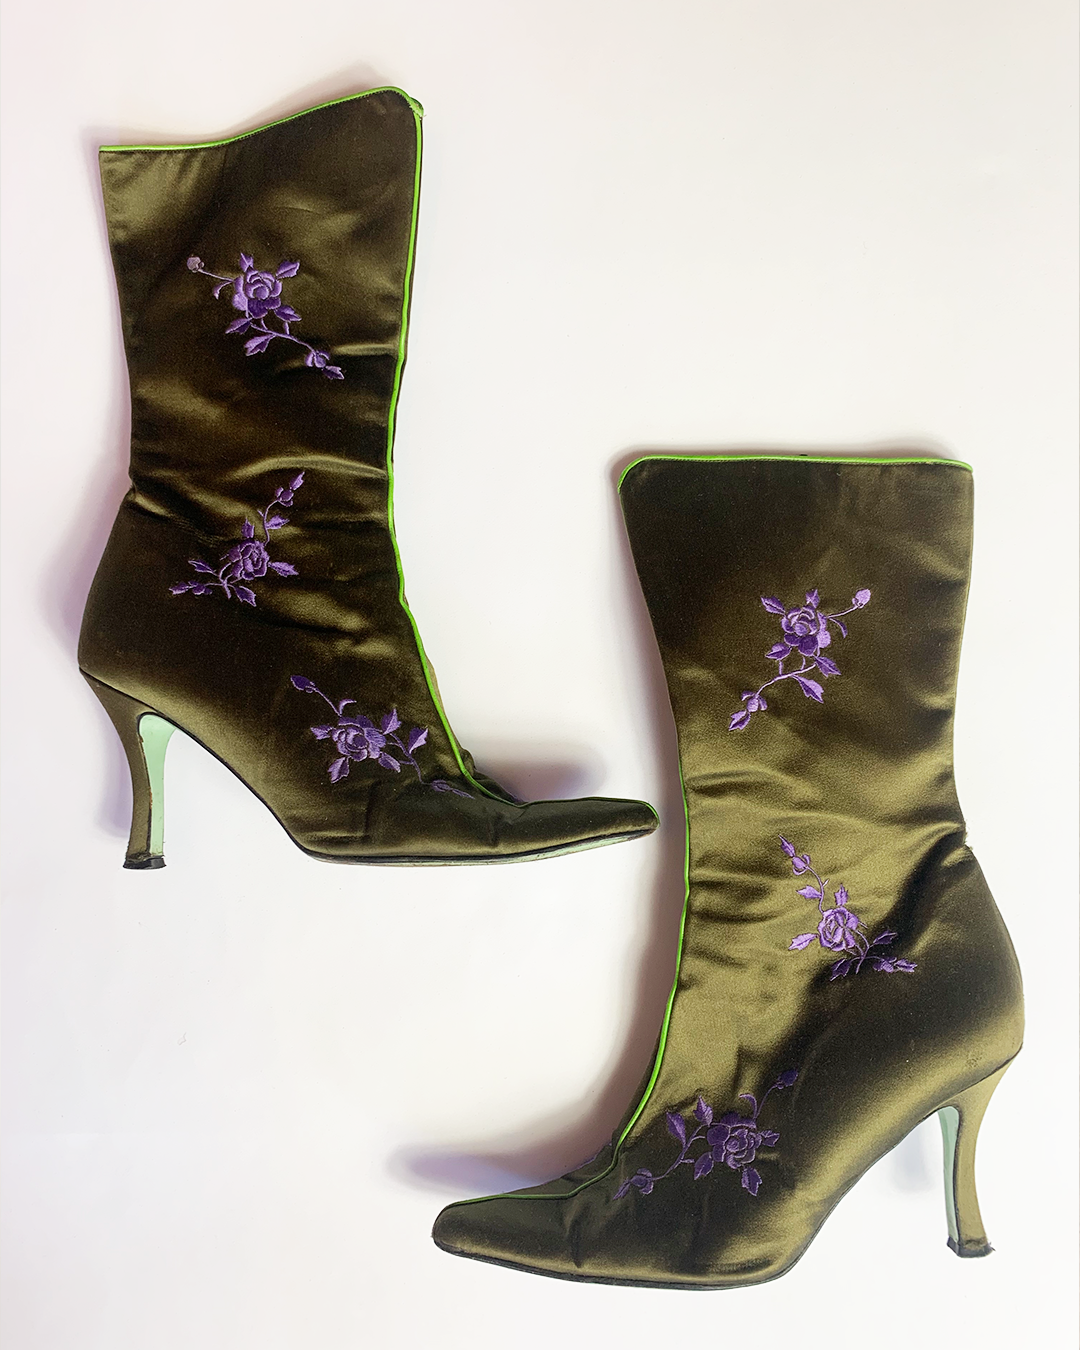 Paul Smith For Emma Hope Green Boots